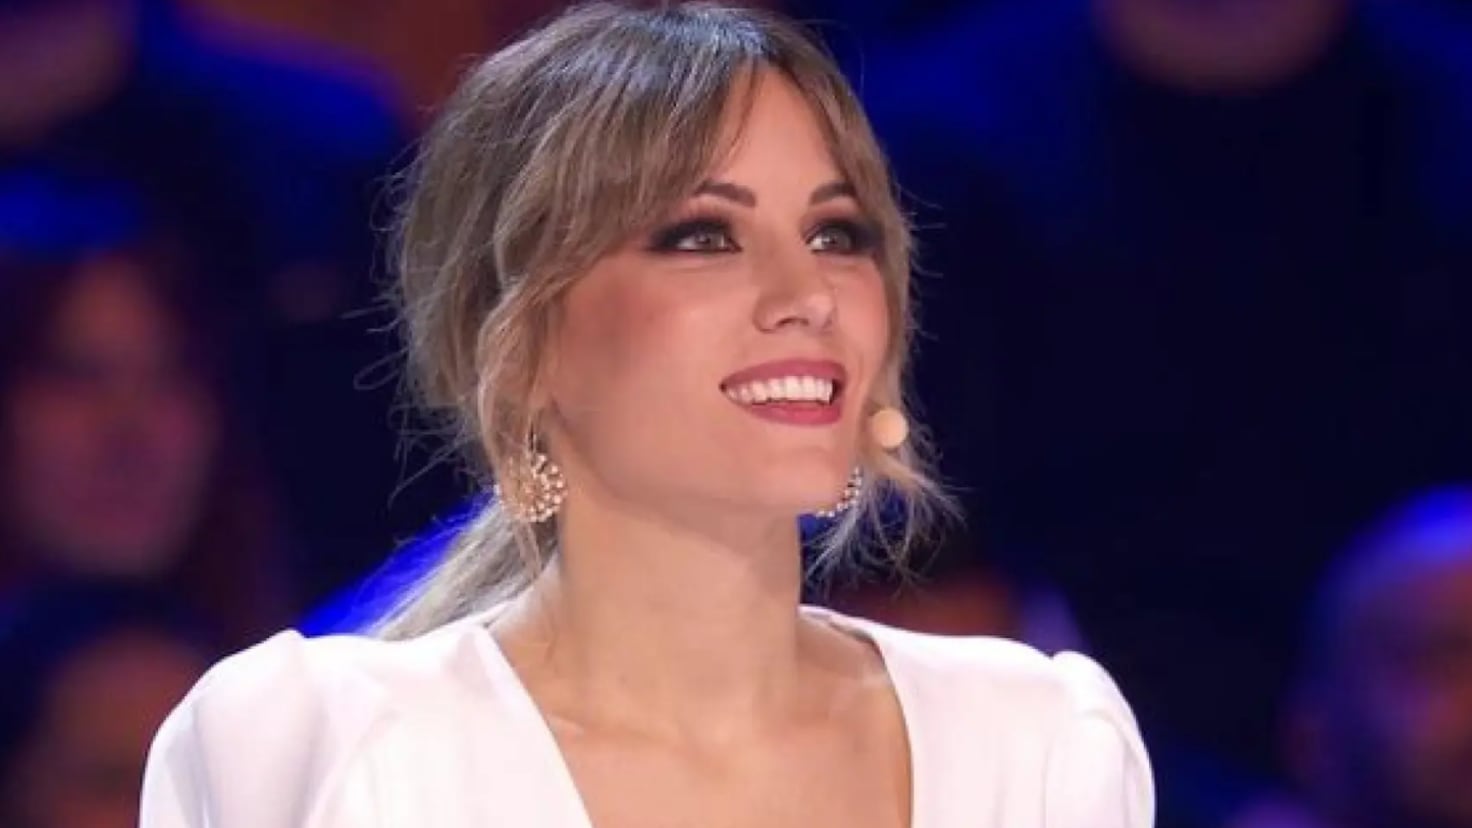 Edurne says goodbye to Got talent: It was a difficult decision
